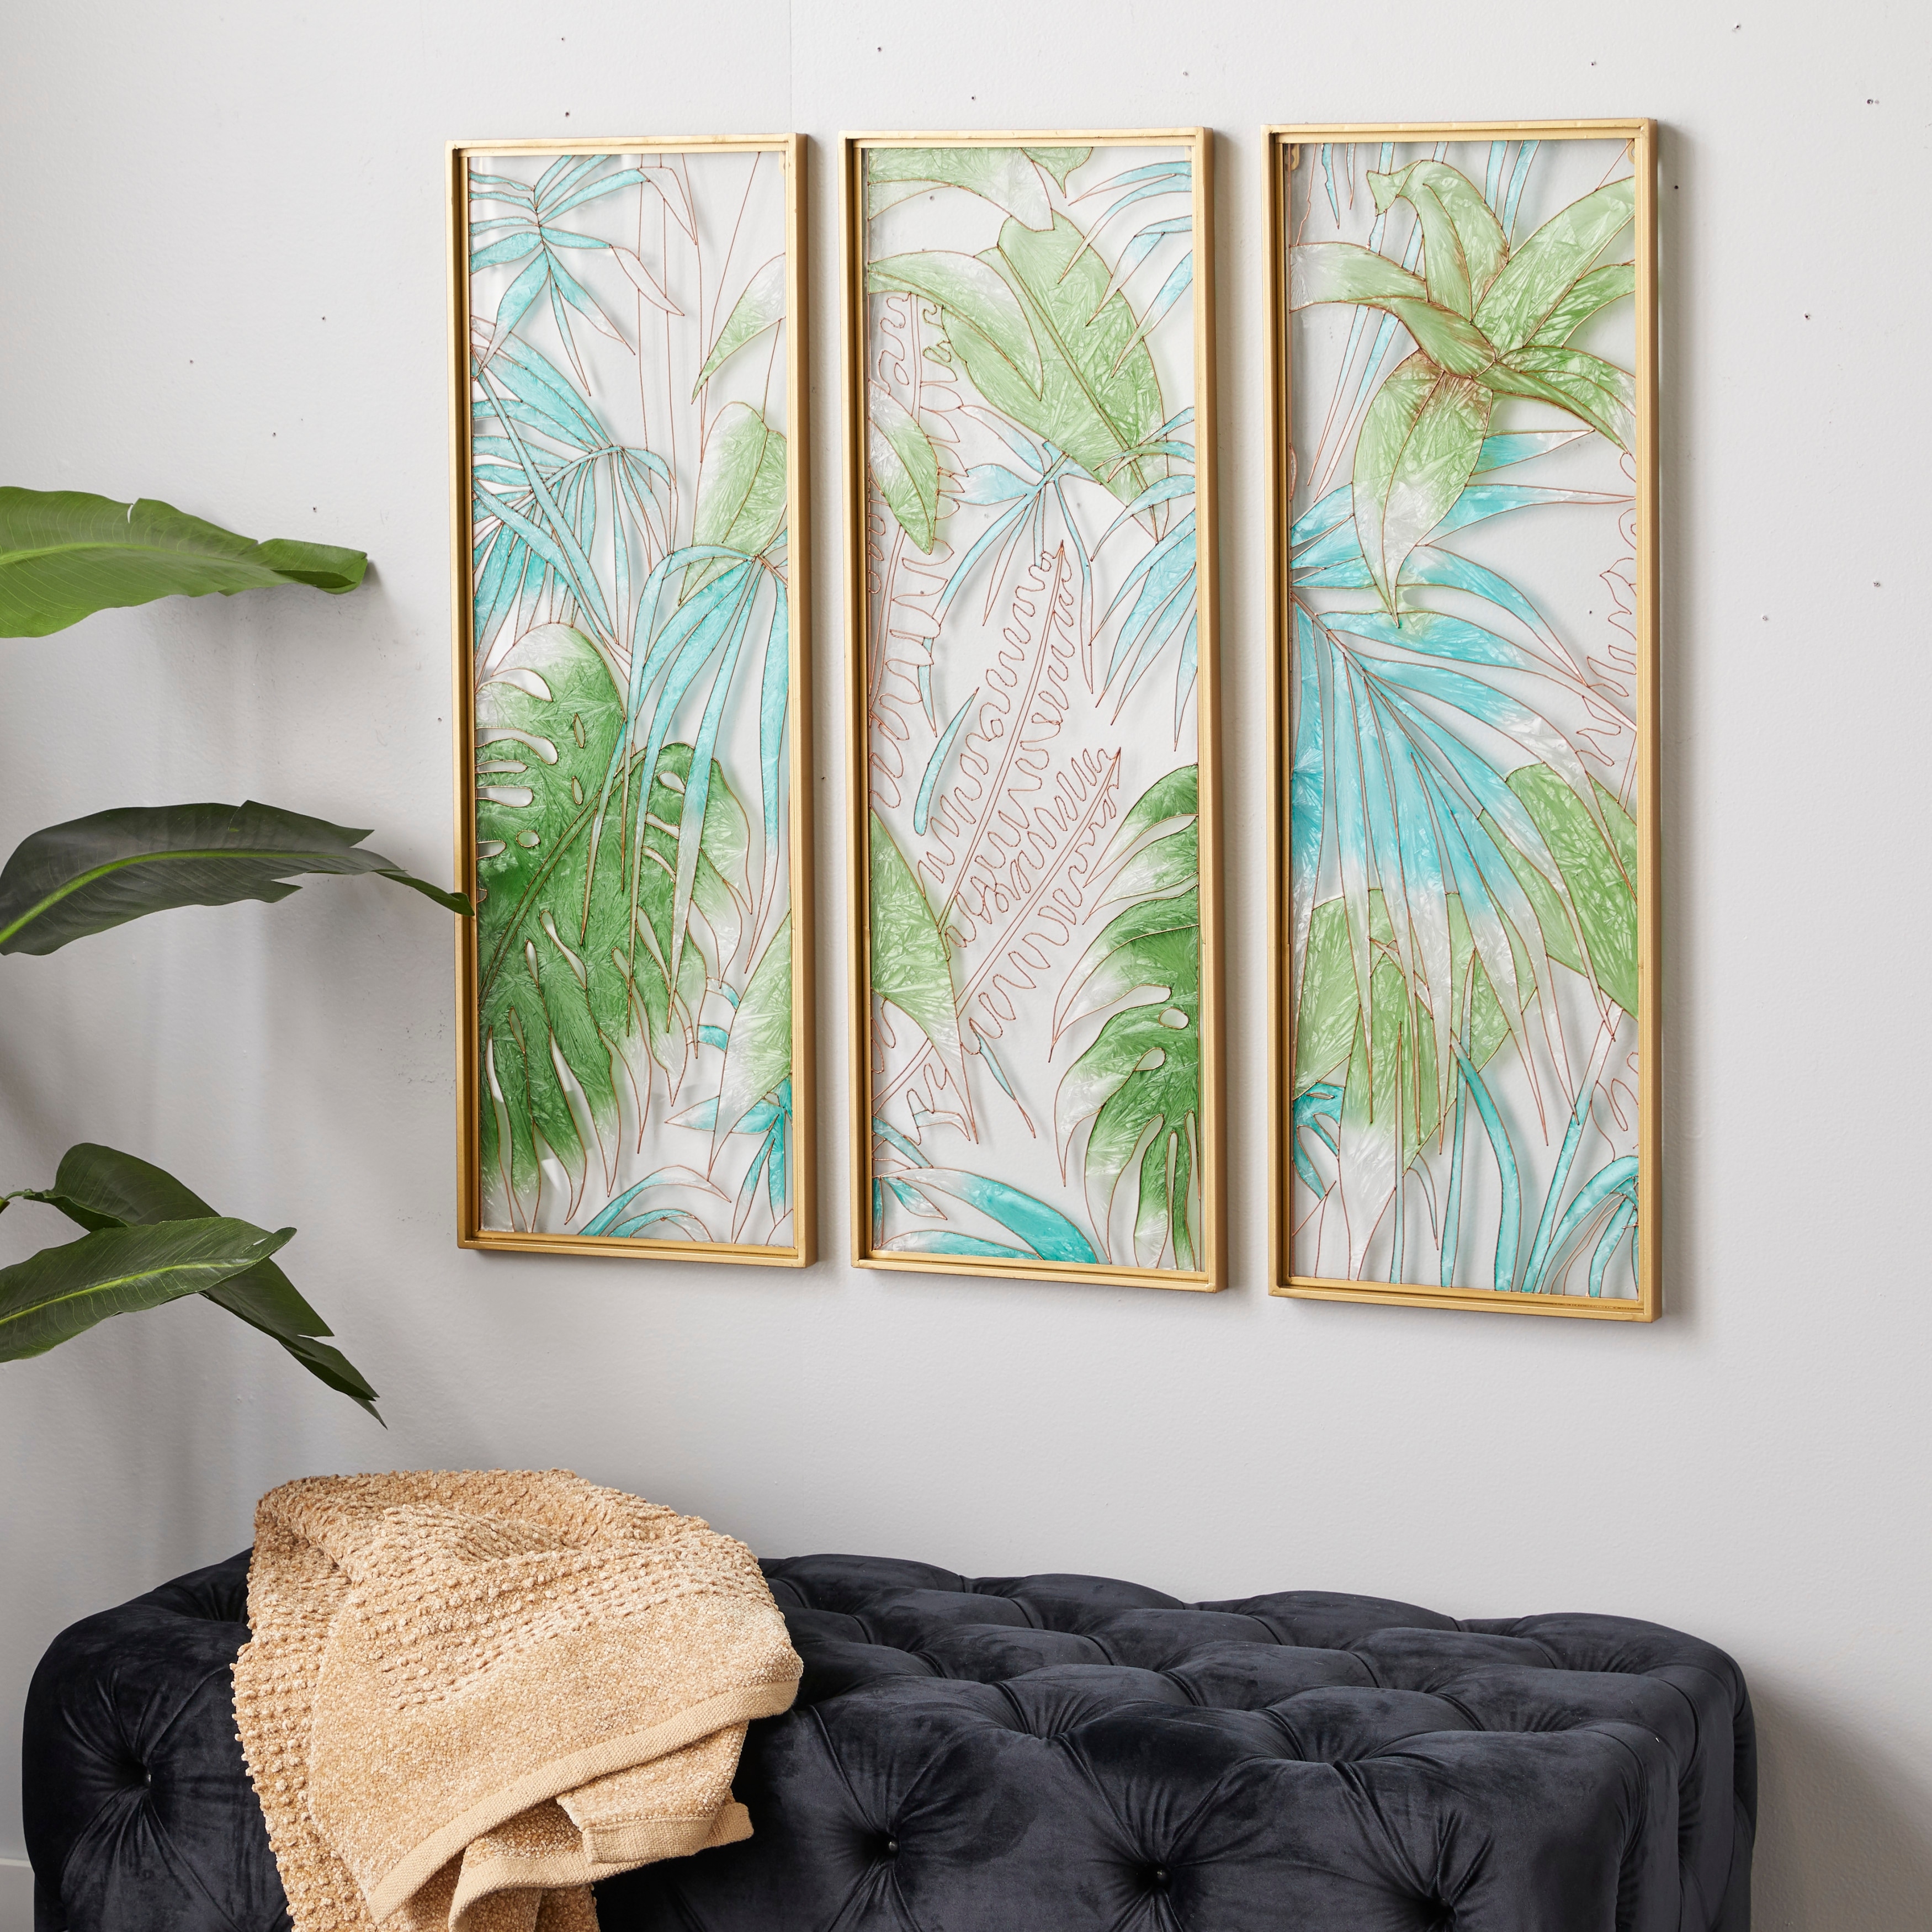 CosmoLiving by Cosmopolitan Green Glass Tropical Leaf Wall Decor with Gold  Frame (Set of 3) 12 x x 36 On Sale Bed Bath  Beyond 32681483